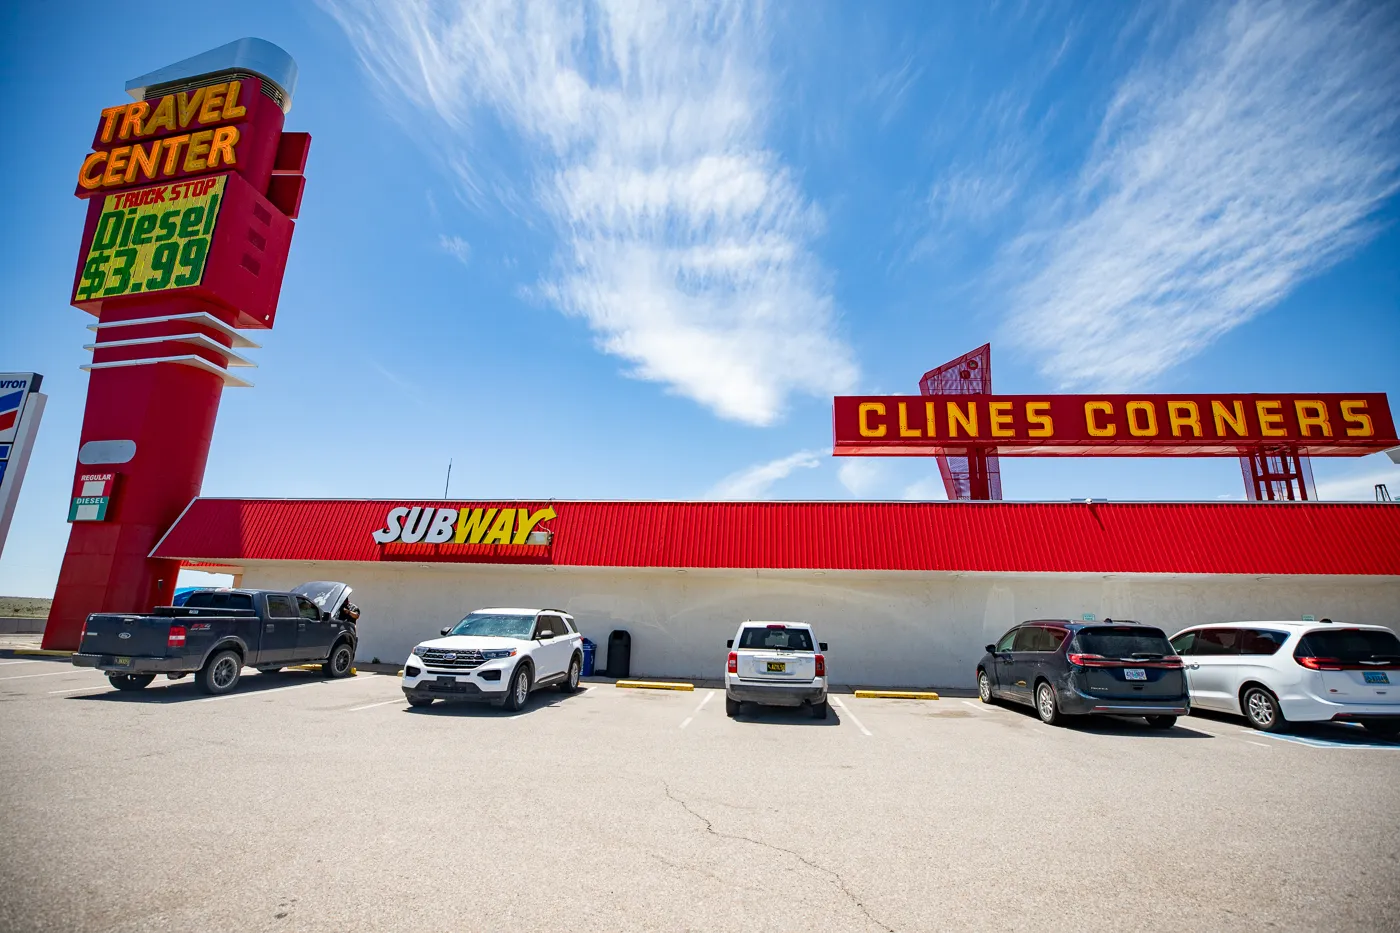 Clines Corners Travel Center in Clines Corners, New Mexico Route 66 Attractions